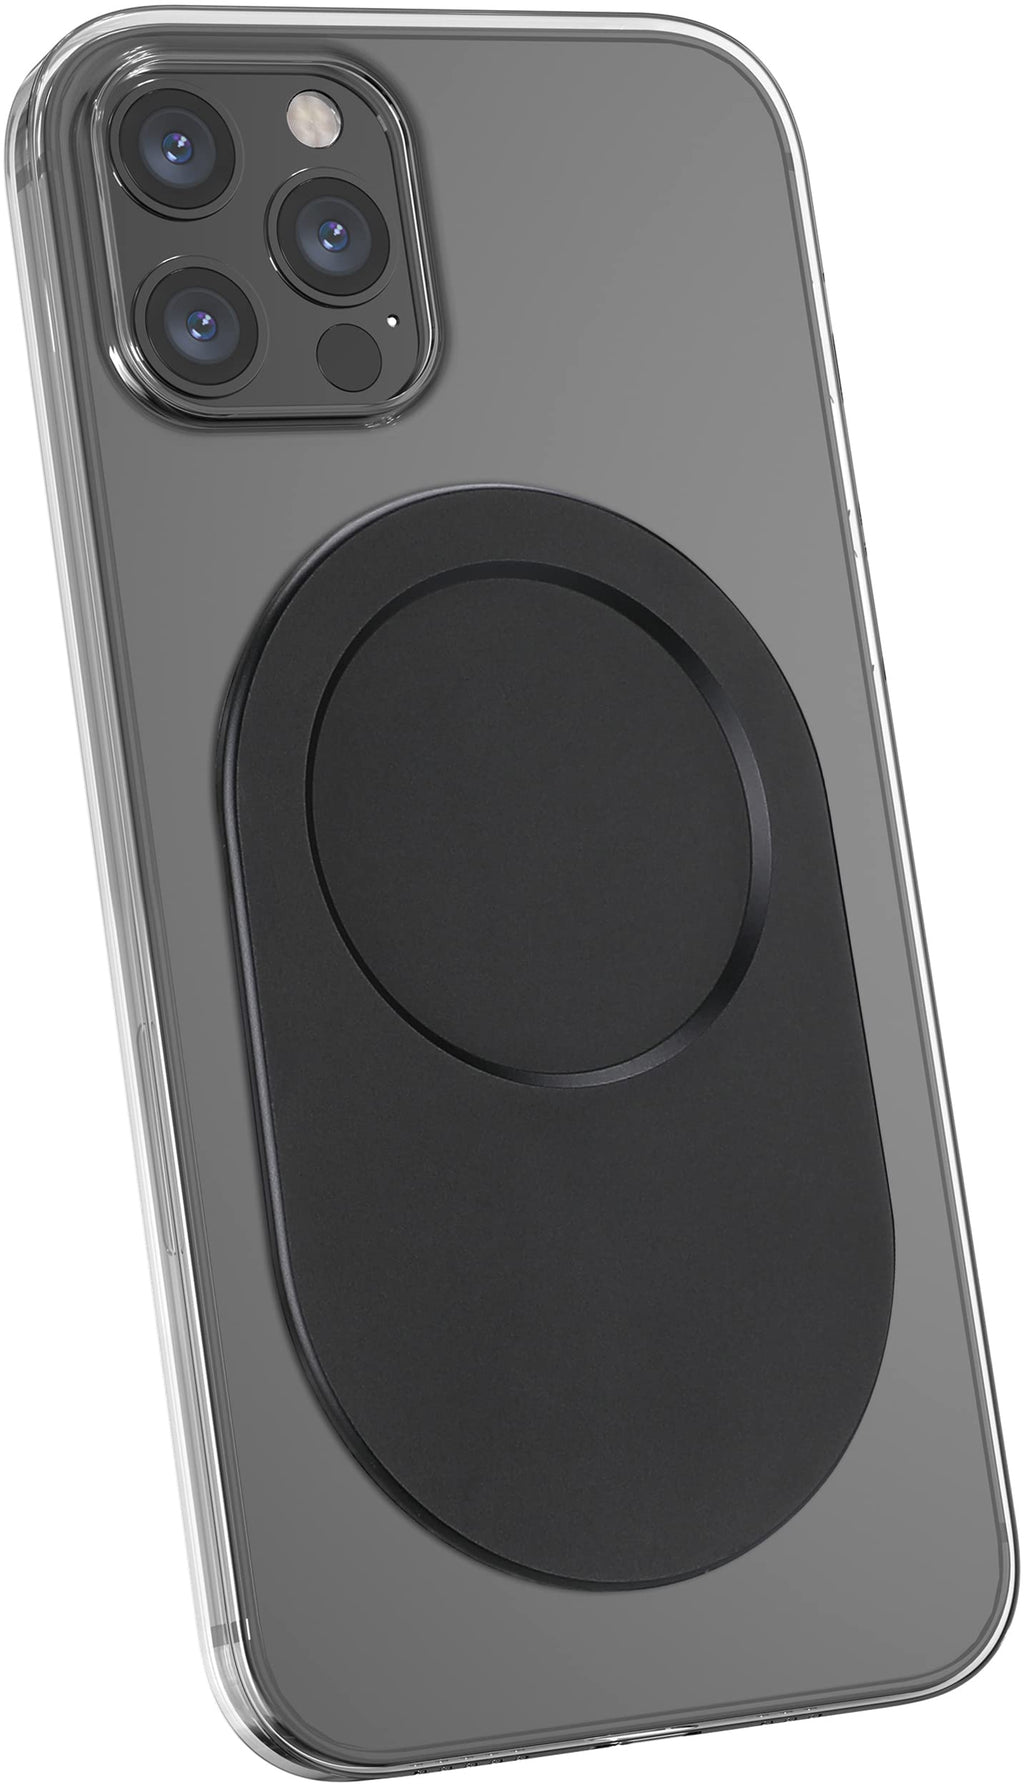  [AUSTRALIA] - metisinno Magnetic Base+ Compatible with PopSocket Phone Grips and iPhone MagSafe Cases, Black Base Plus